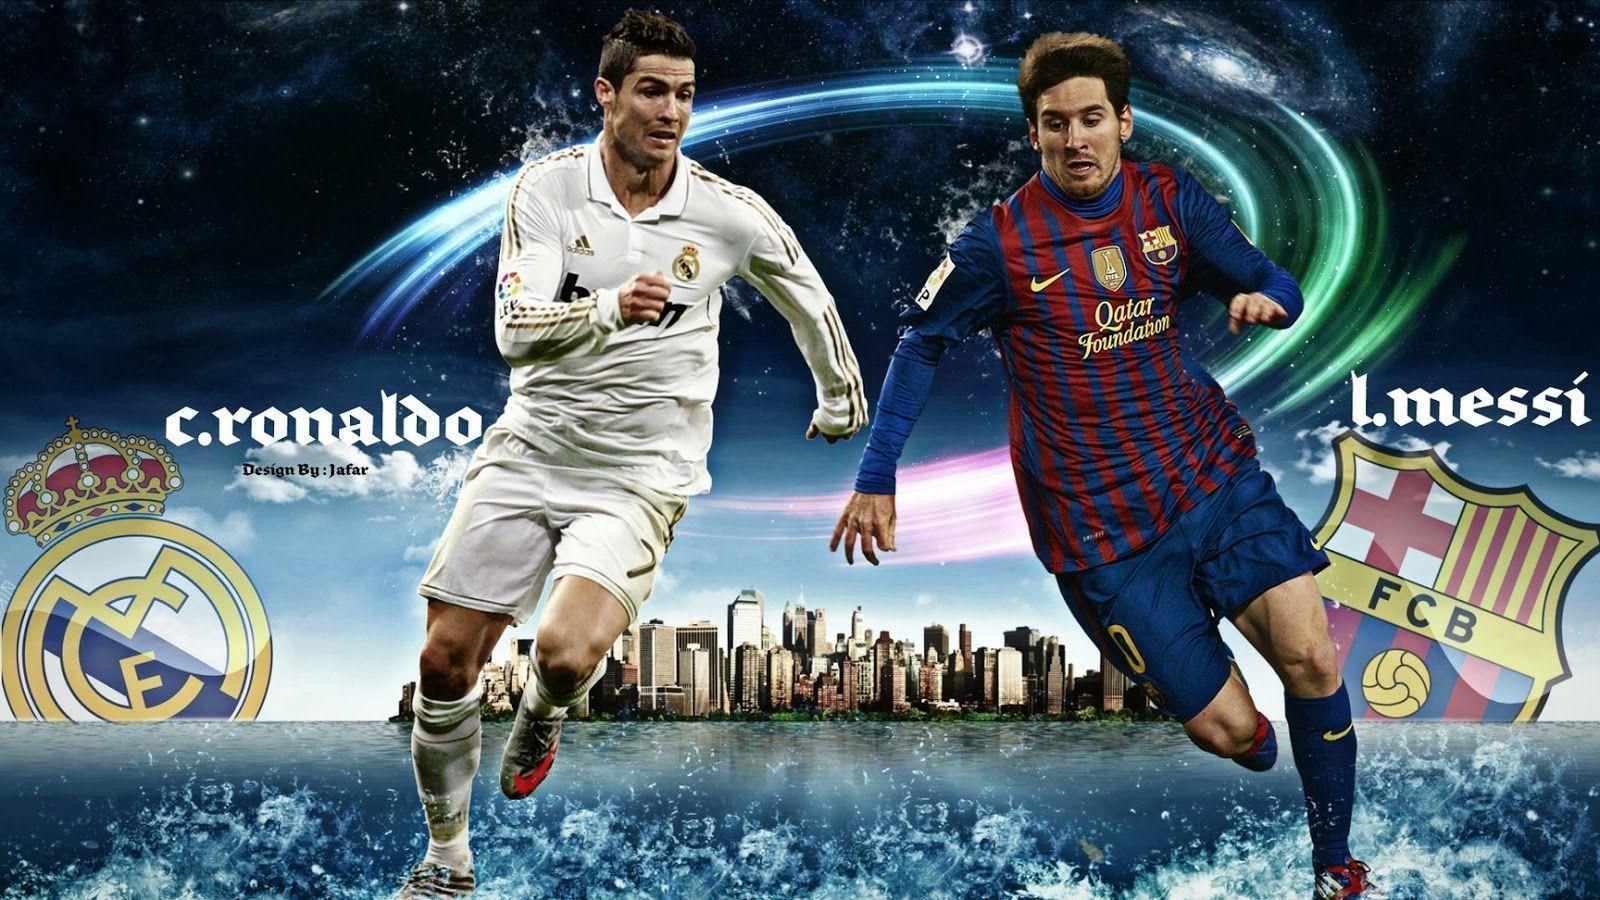 Download wallpapers Cristiano Ronaldo and Lionel Messi 4k blue neon  lights football stars soccer CR7 Lionel Messi Cristiano Ronaldo for  desktop with resolution 3840x2400 High Quality HD pictures wallpapers